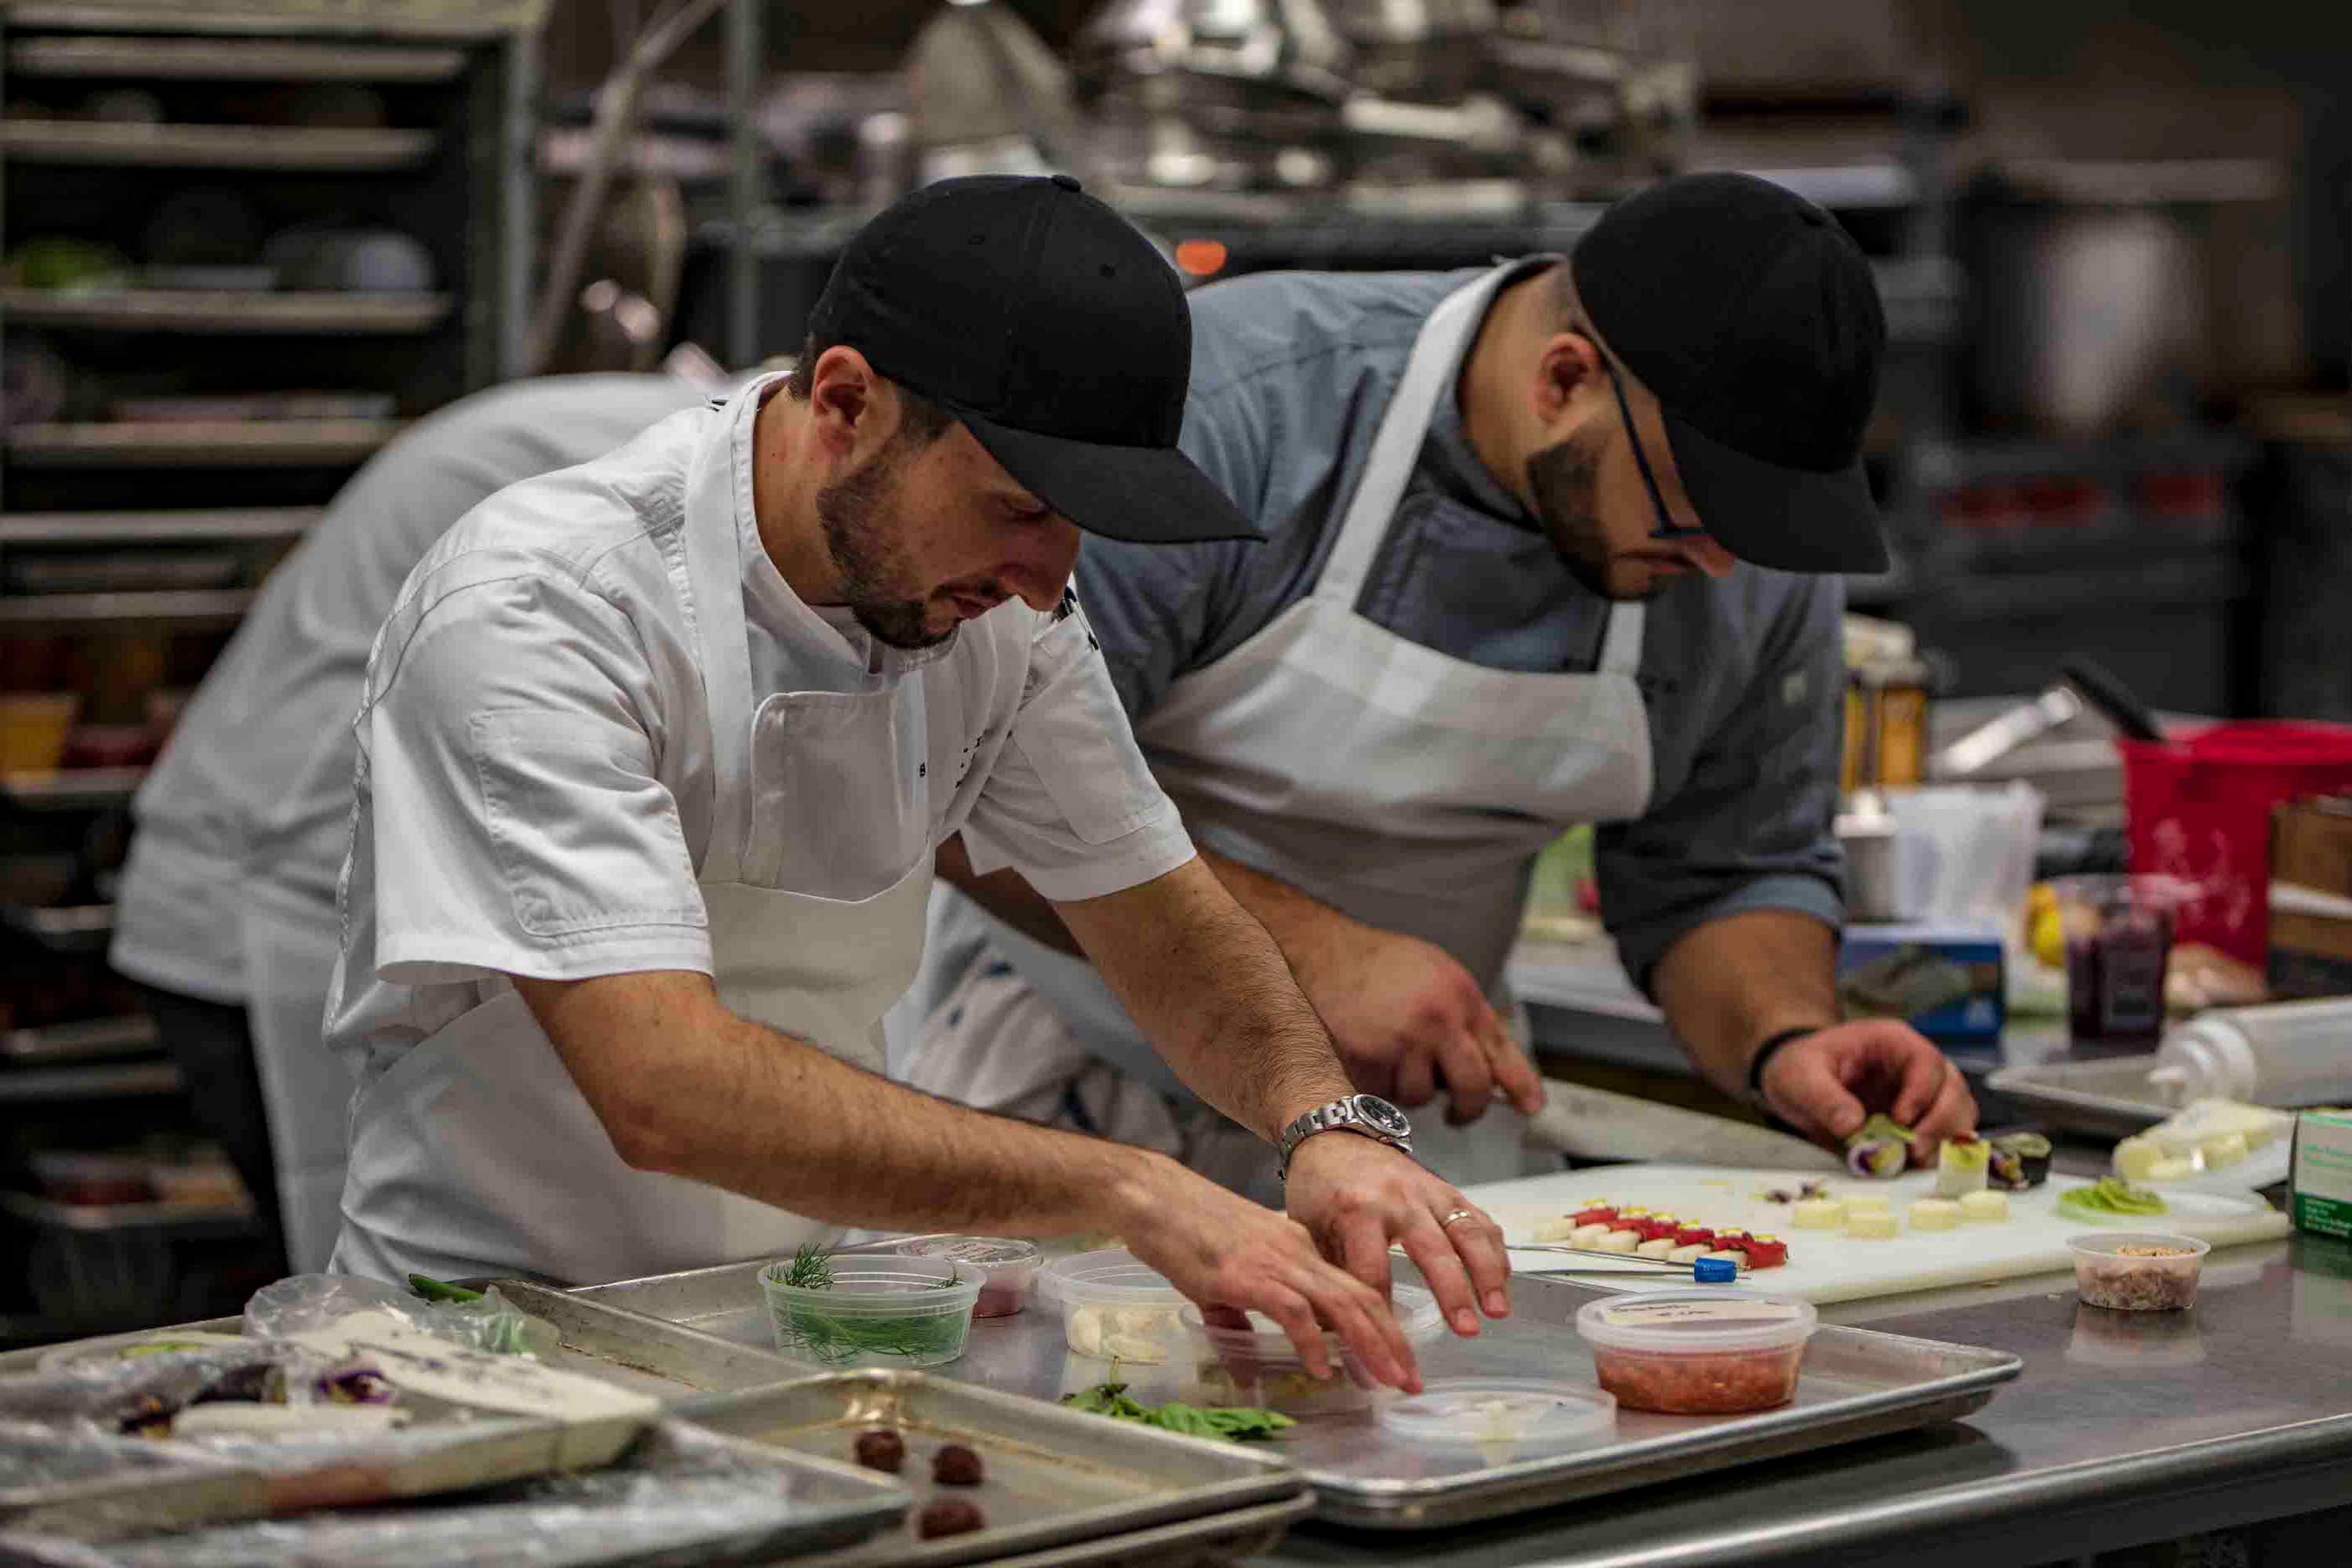 Two chefs focused on carefully plating dishes in a professional kitchen.